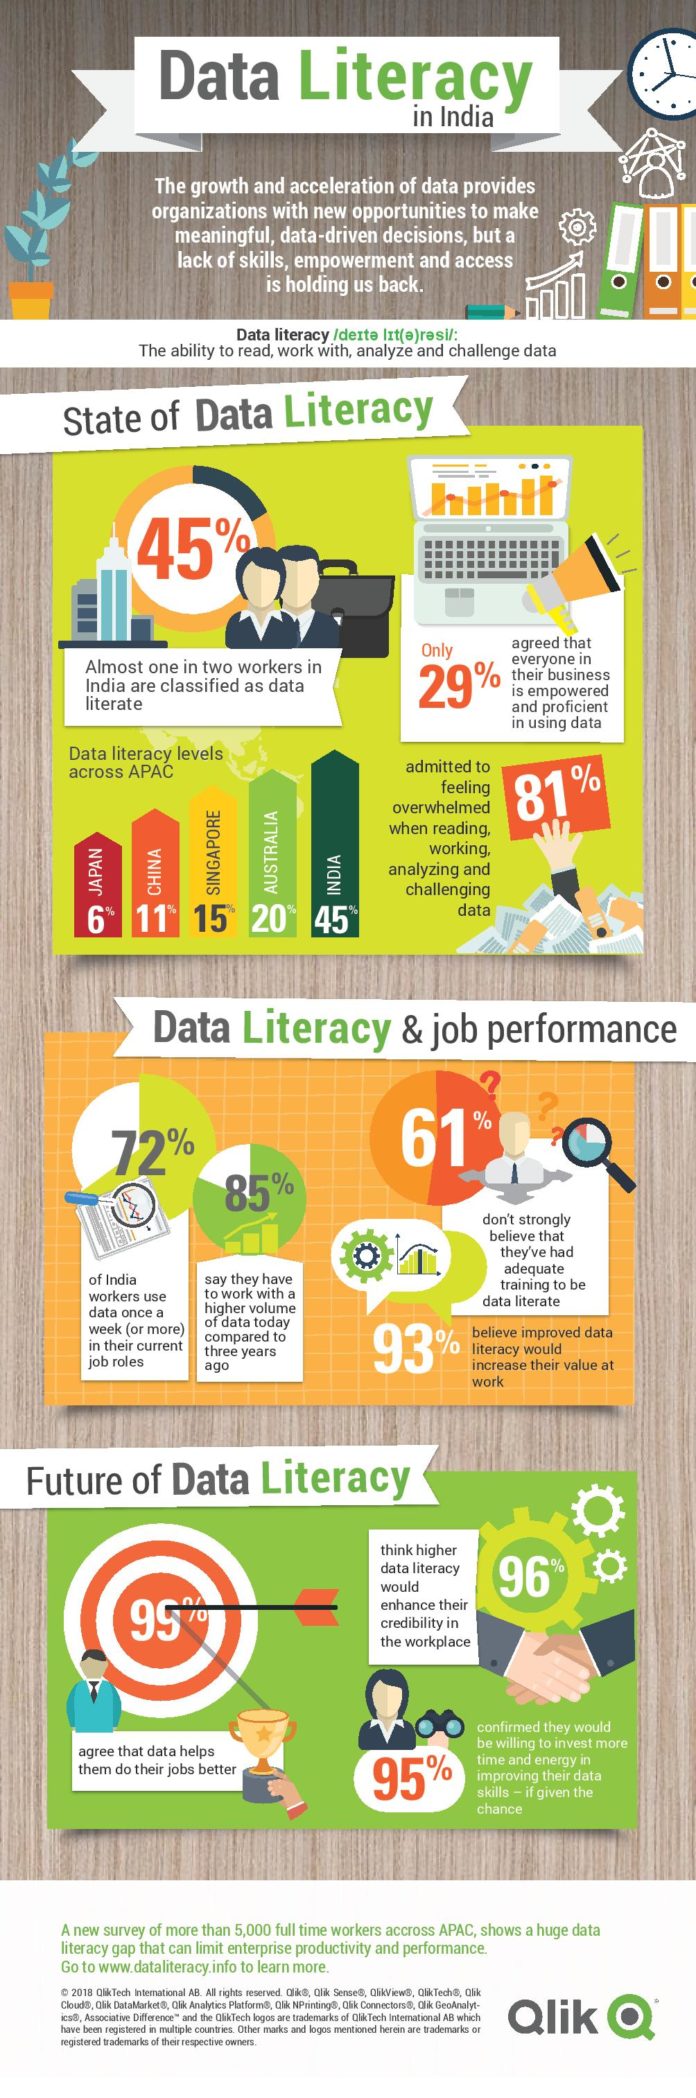 Qlik Data Literacy Survey - Indian Workforce as Most Data Literate in APAC - 45% Indian employees confident in their data literacy skills